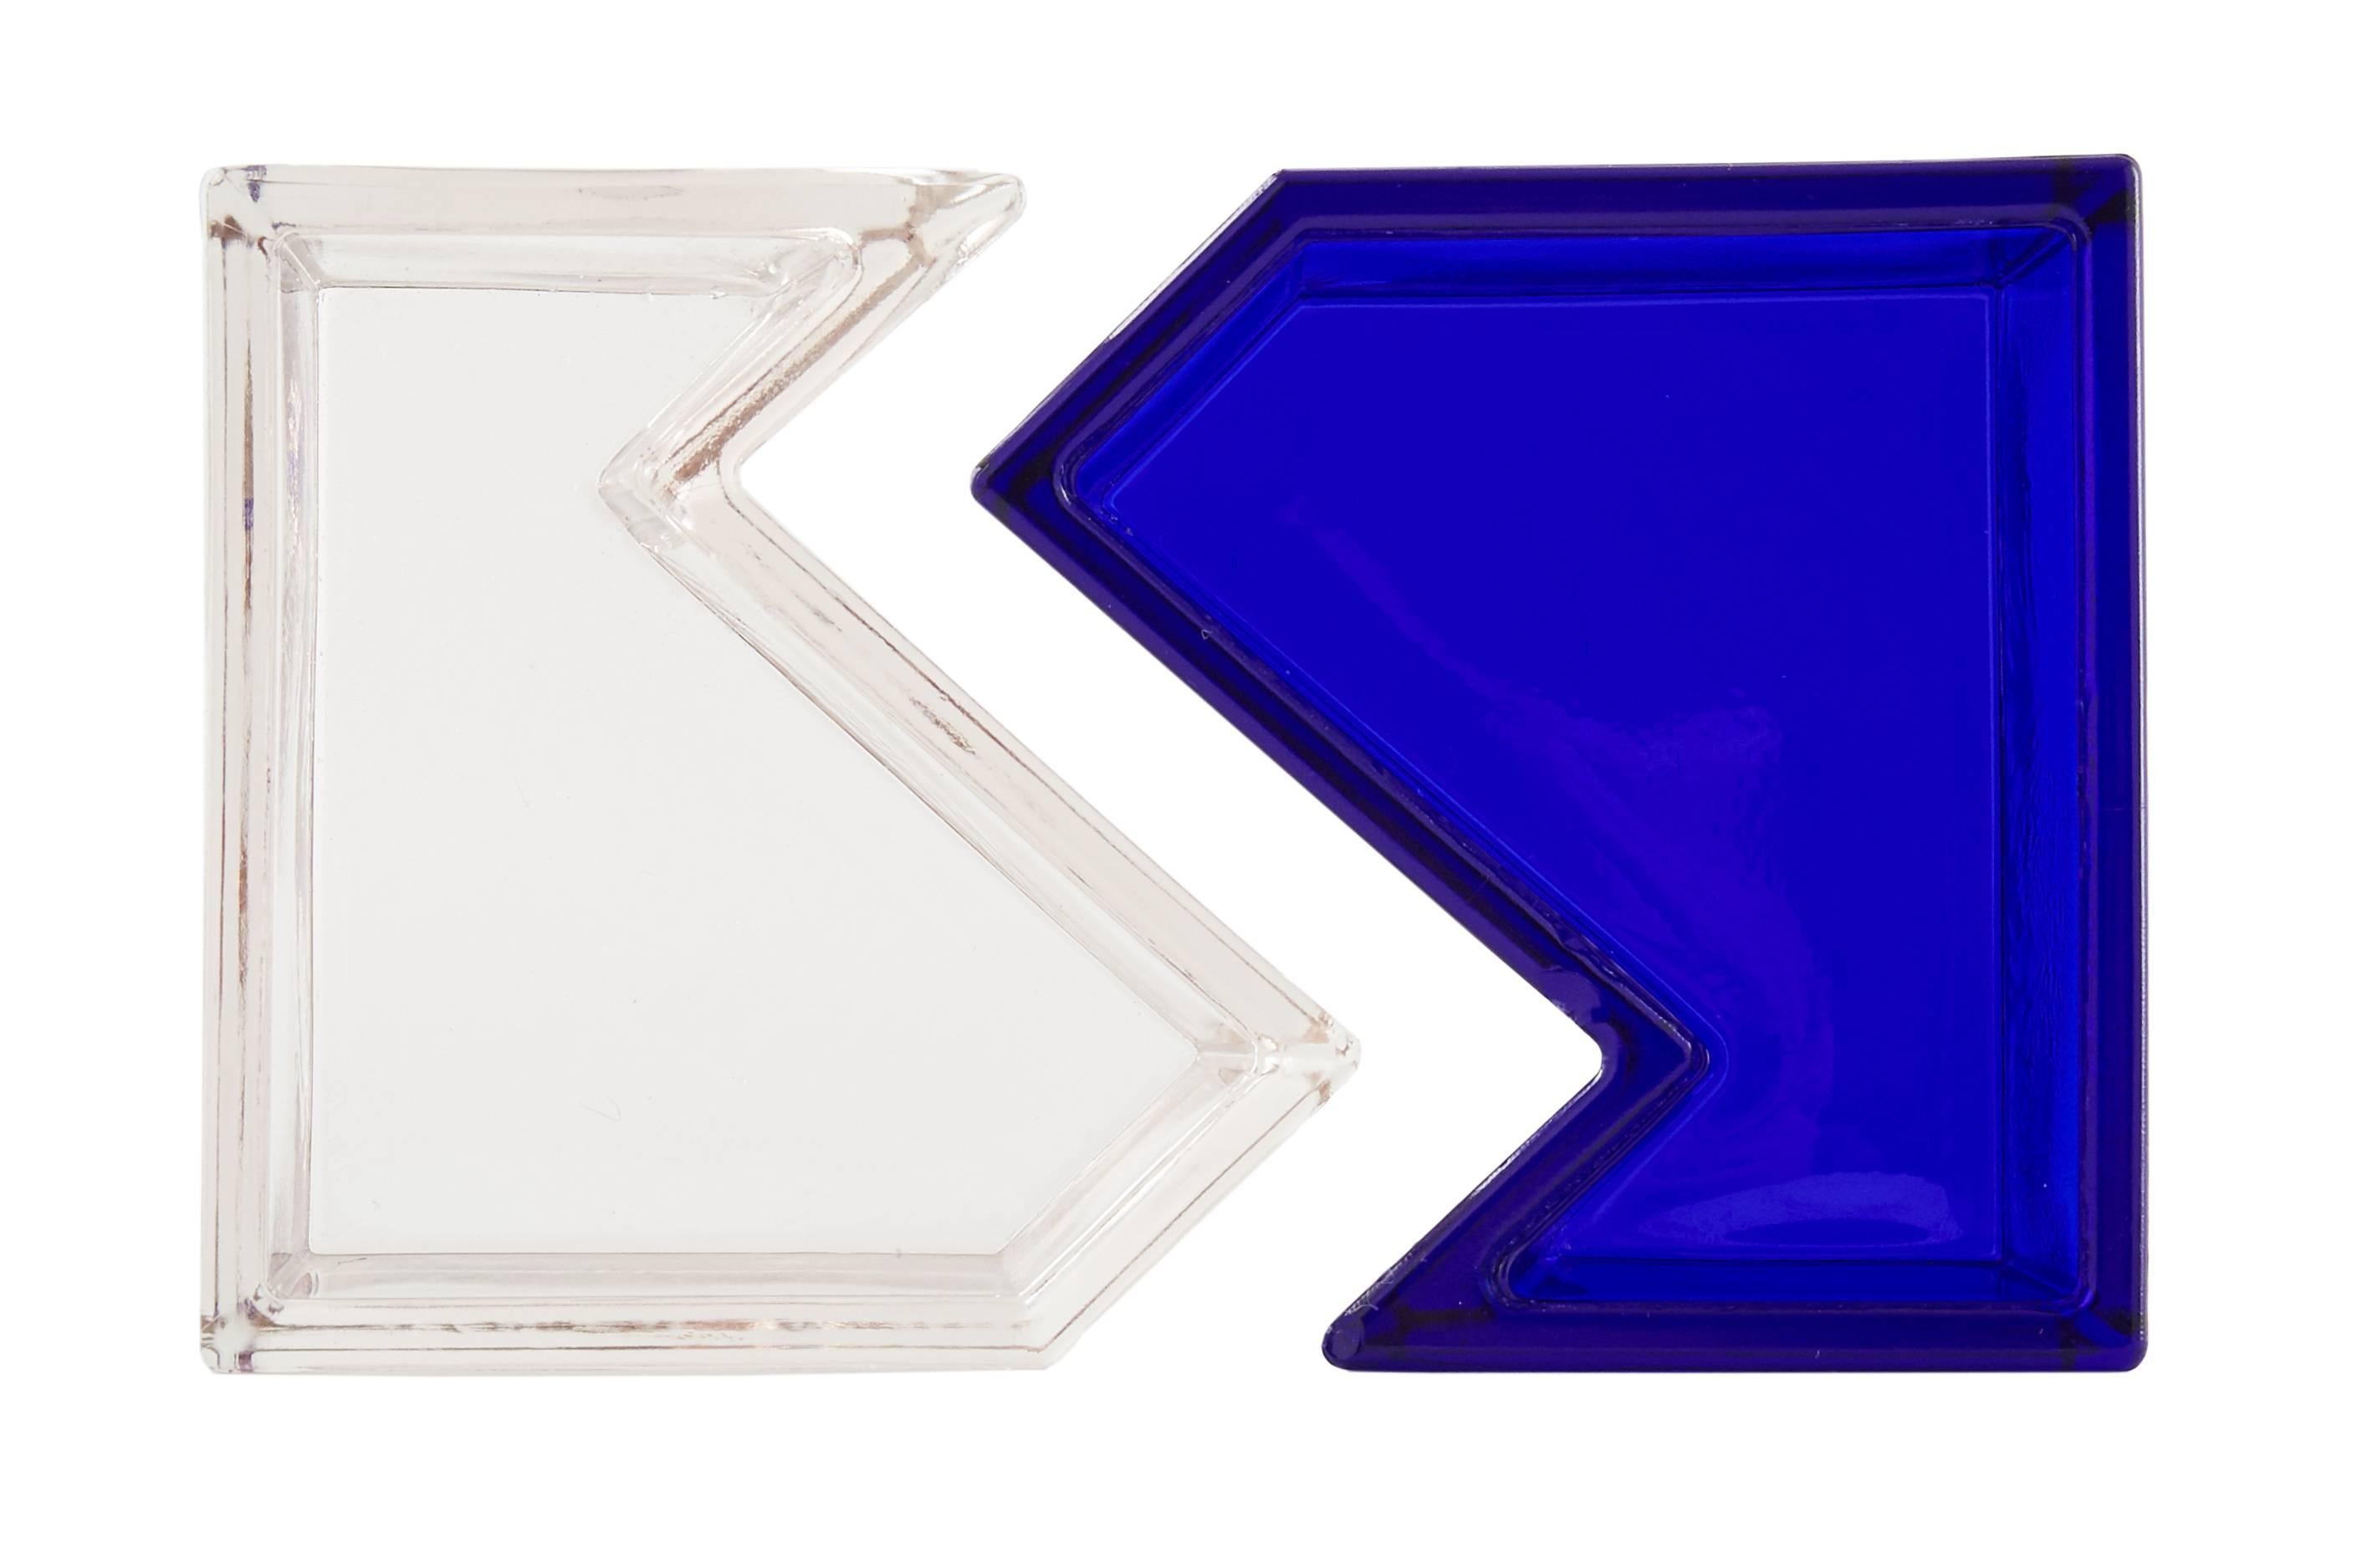 Inspired by Campbell-Rey's passion for l’art de table and a spirit of conviviality, they looked to the geometry of art deco architecture to create Alvise, an interlocking salt and pepper set crafted from Murano glass.

The striking pieces are